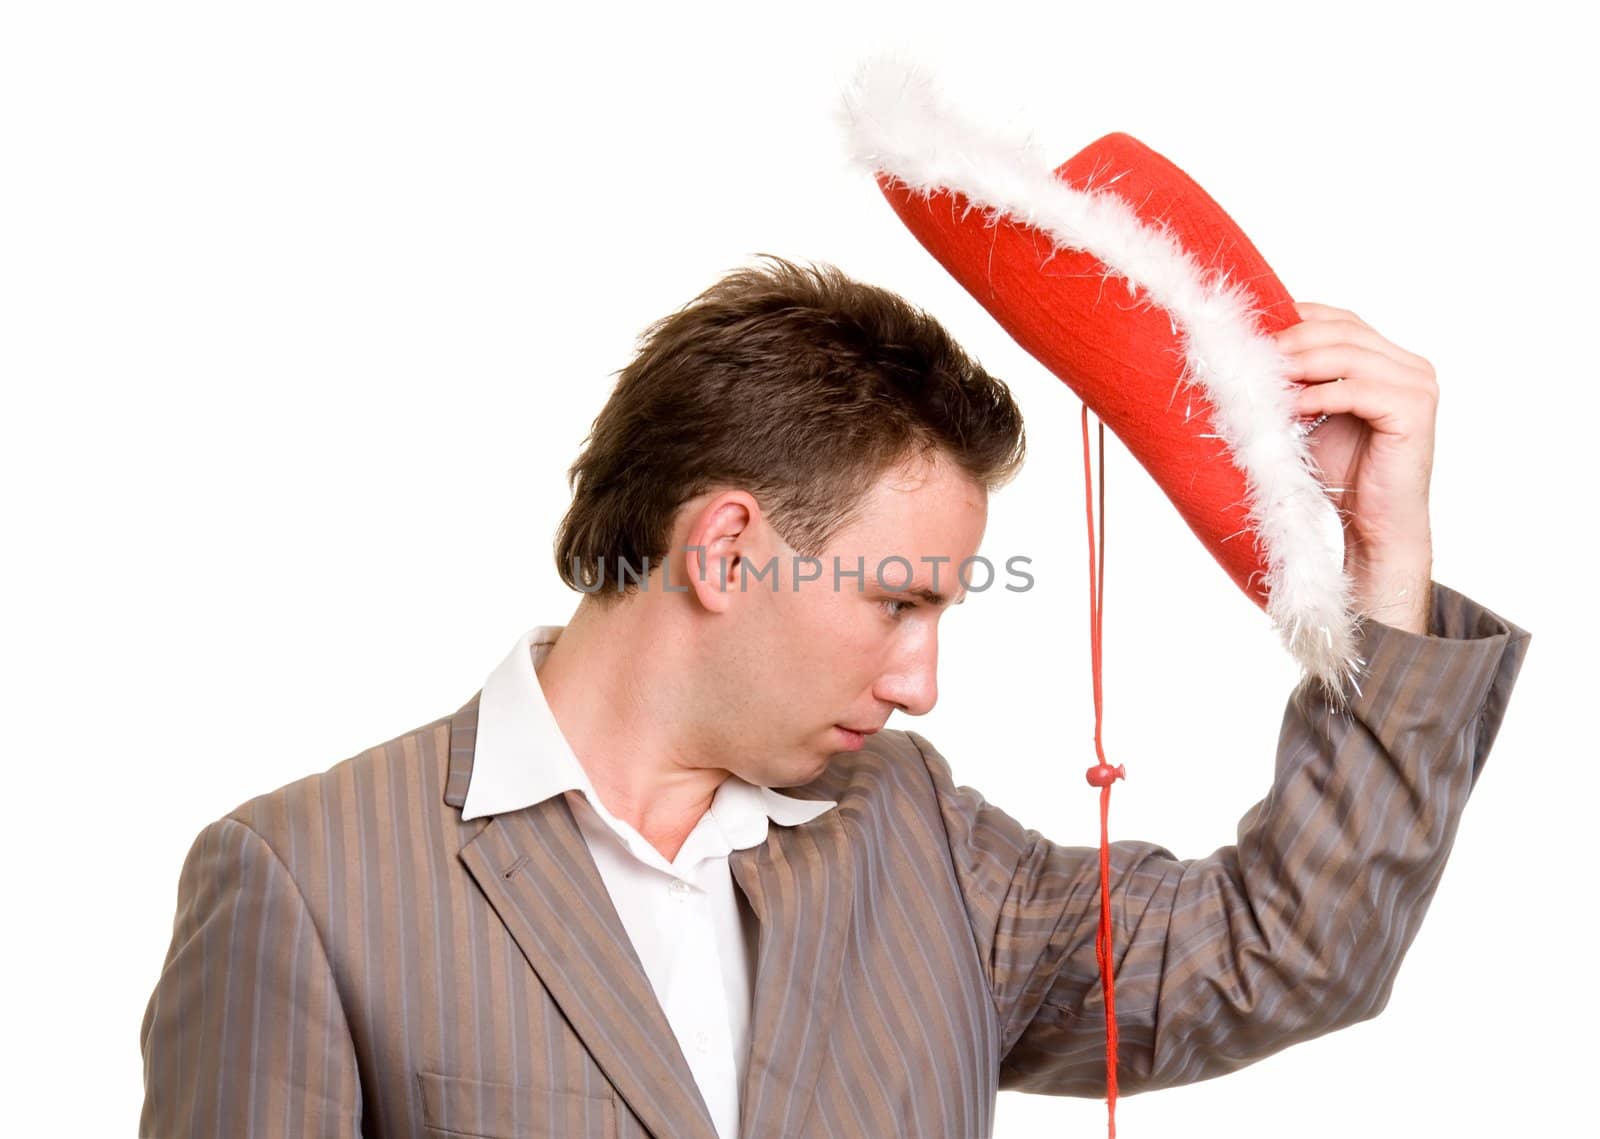 fop with red hat on a white background